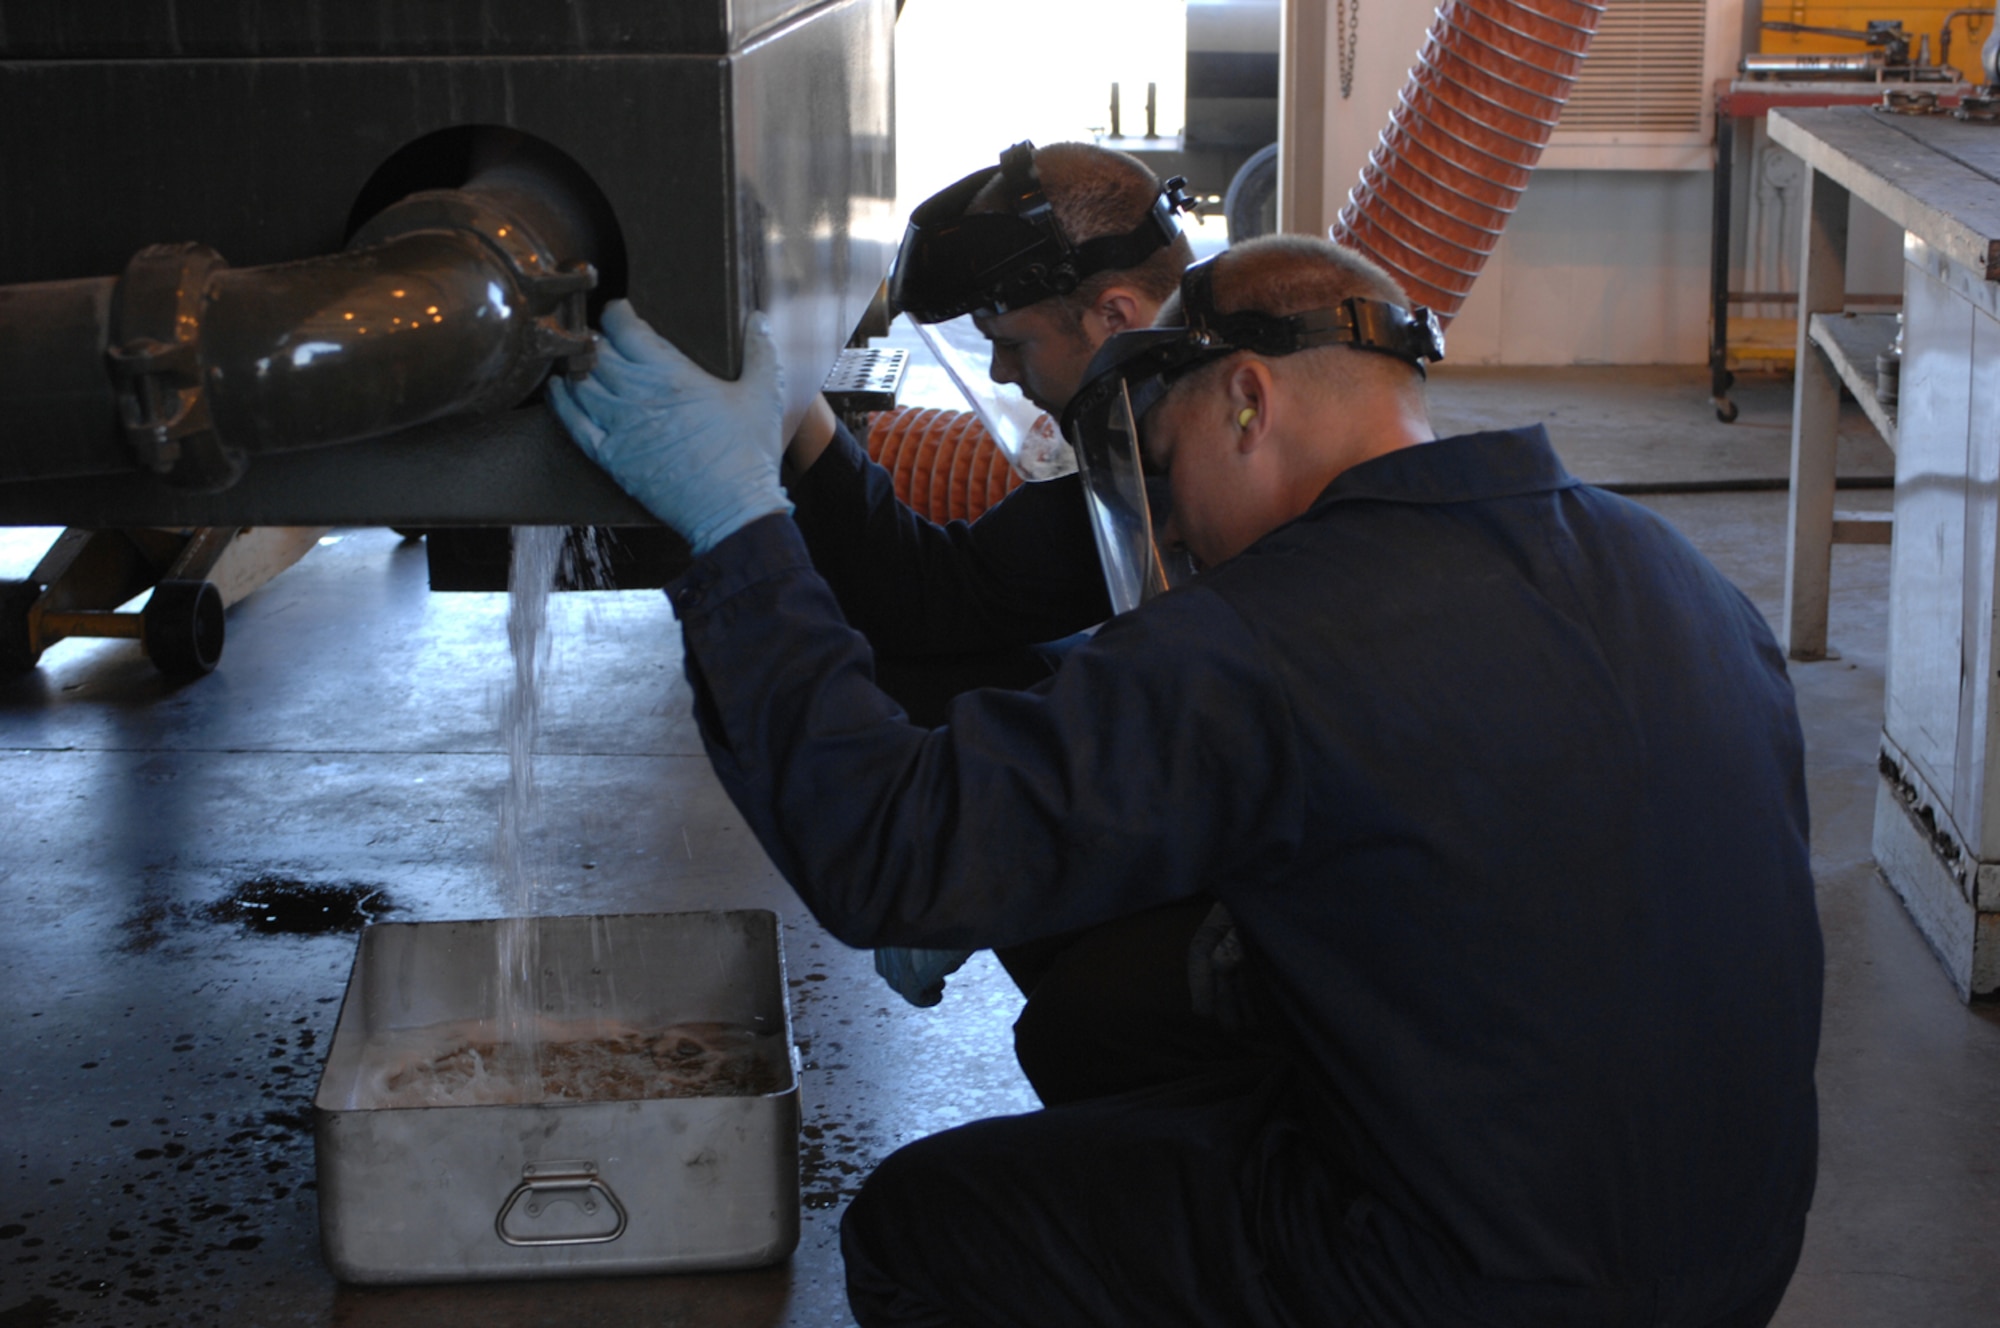 Senior Airman Daniel Young and Staff Sgt. Jefferson Perkins drain JP-8 fuel as part of the inspection for preparation to be shipped out (U.S. Air Force Photo/Senior Airman Jason Huddleston)